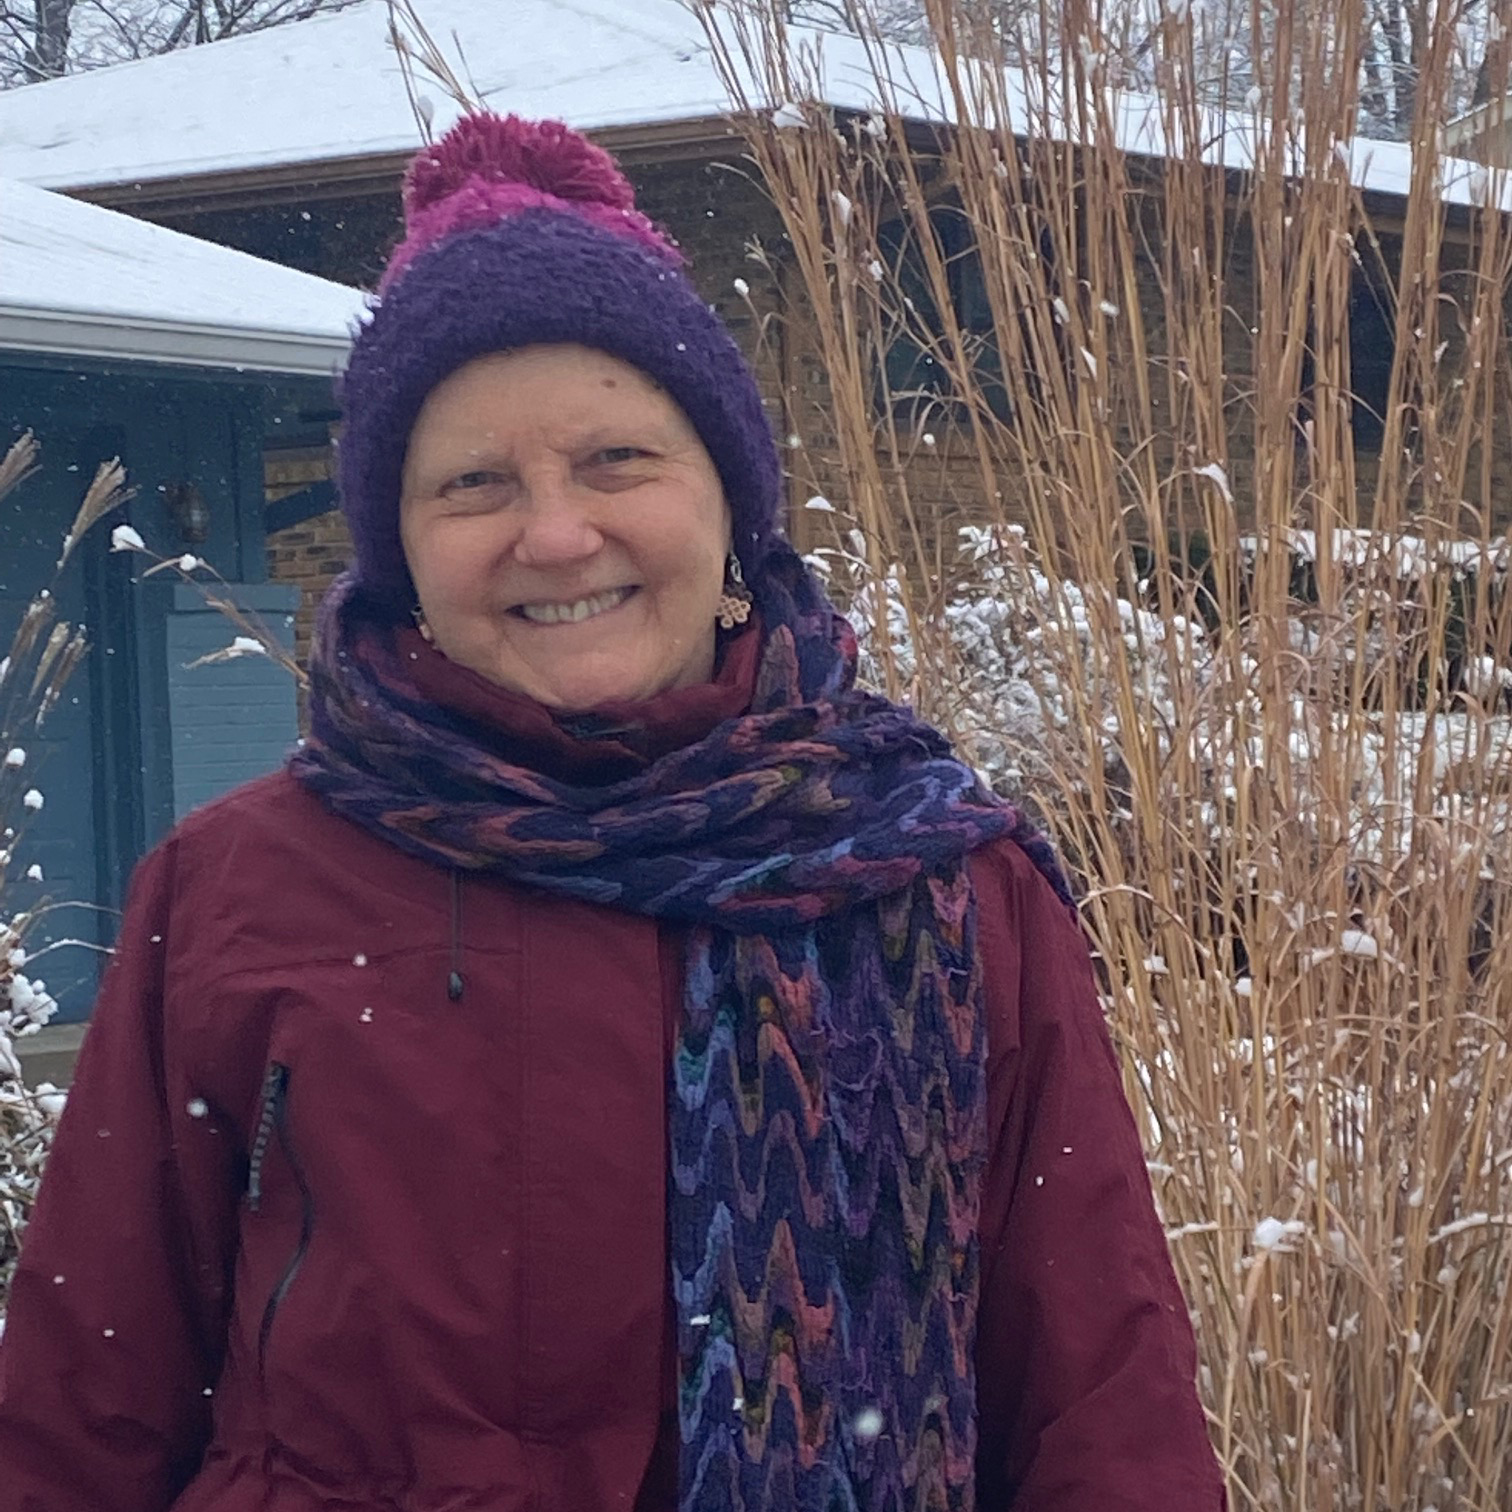 Dianne Clemens smiling wearing a hat and scarf in the snow